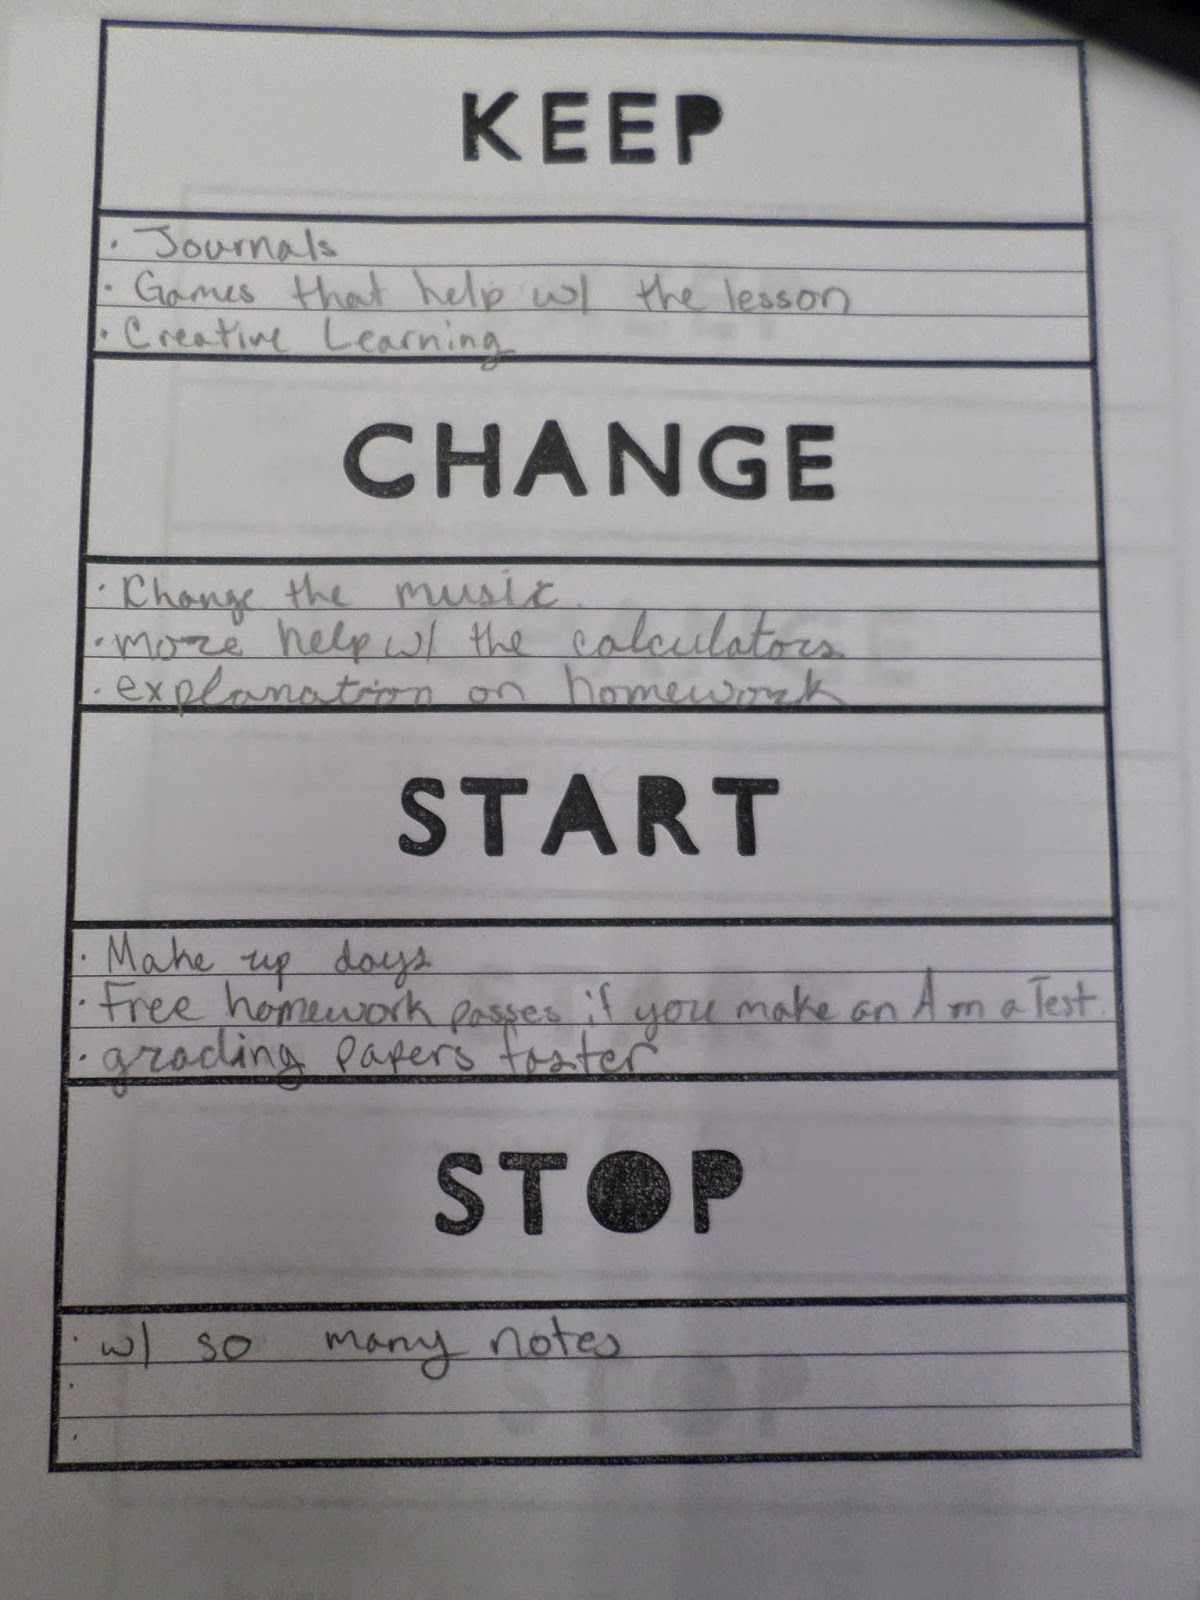 student replies to keep change start stop reflection form 